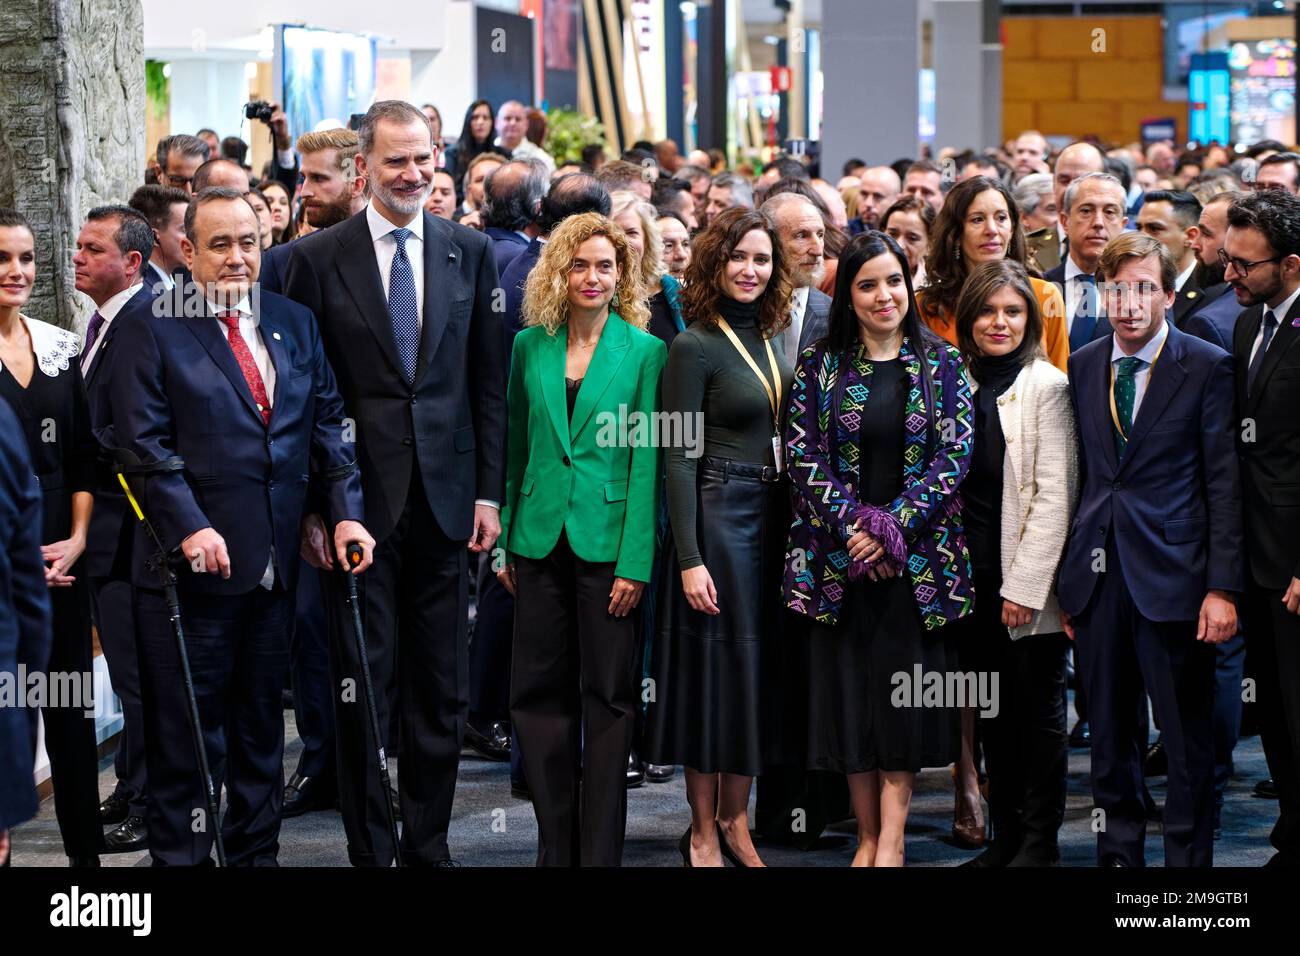 Madrid, Spain. 18th Jan, 2023.  FITUR the International Tourism Fair of Spain 2023. SS.MM. the King and Queen of Spain and different authorities officially inaugurate FITUR 2023, the International Tourism Fair. Queen Letizia (1l); The president of Guatemala, Alejandro Giammattei (2l); King Felipe VI (3l); the president of the Congress of Deputies, Meritxell Batet (4l); the president of the Community of Madrid, Isabel Diaz Ayuso (5r), and the mayor of Madrid, Jose Luis Martinez-Almeida (2r). IFEMA, Madrid, Spain. Credit: EnriquePSans/Alamy Live News Stock Photo